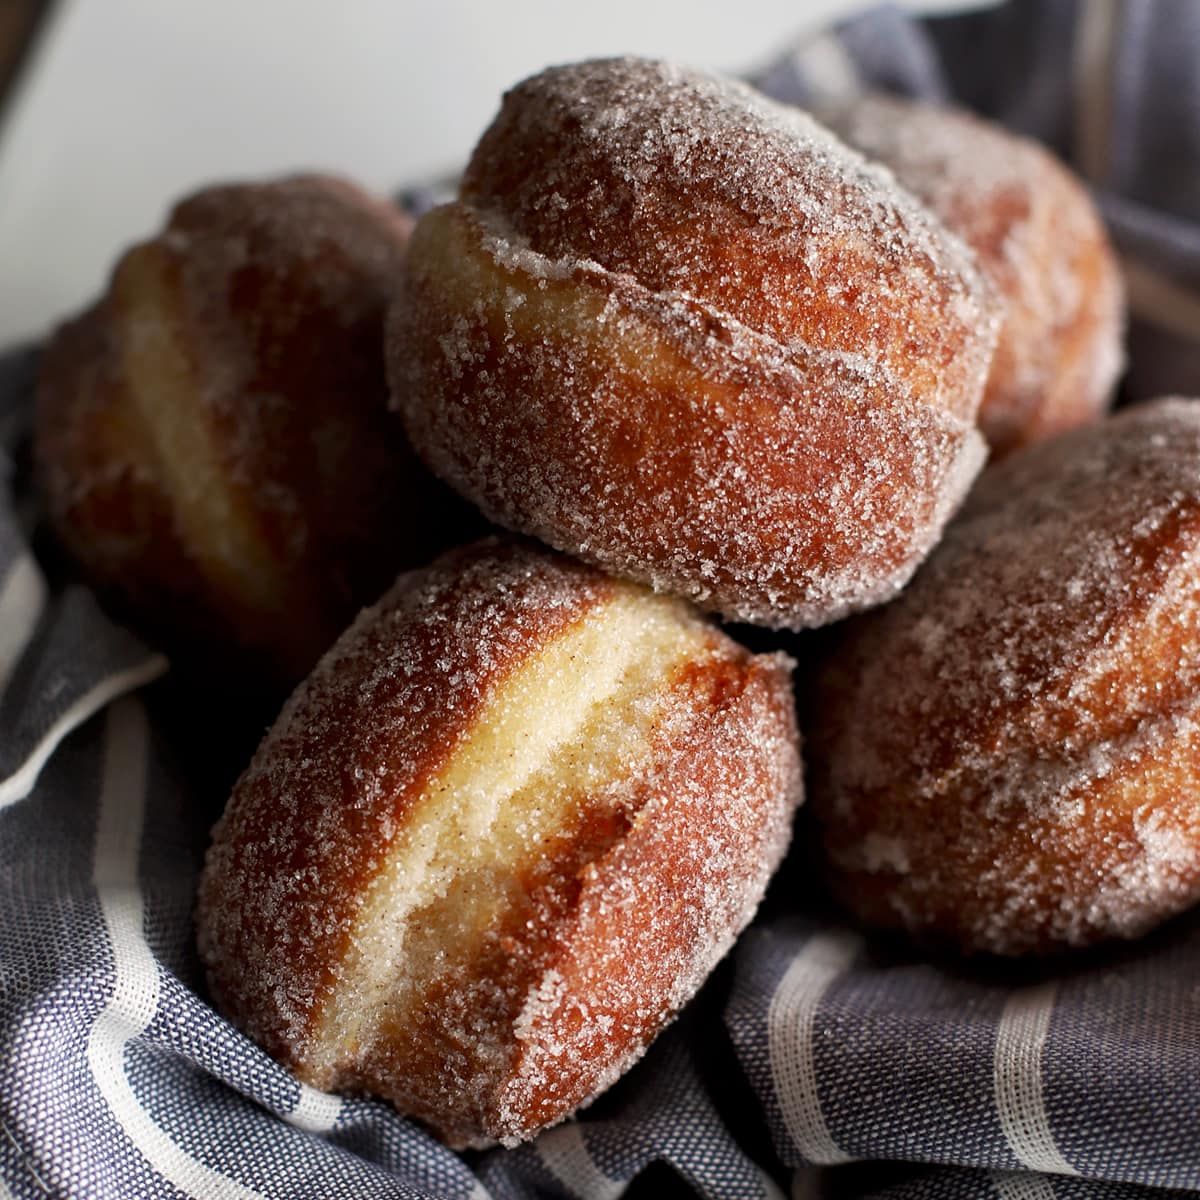 French beignets (Alsatian donuts) - Picnic on a Broom